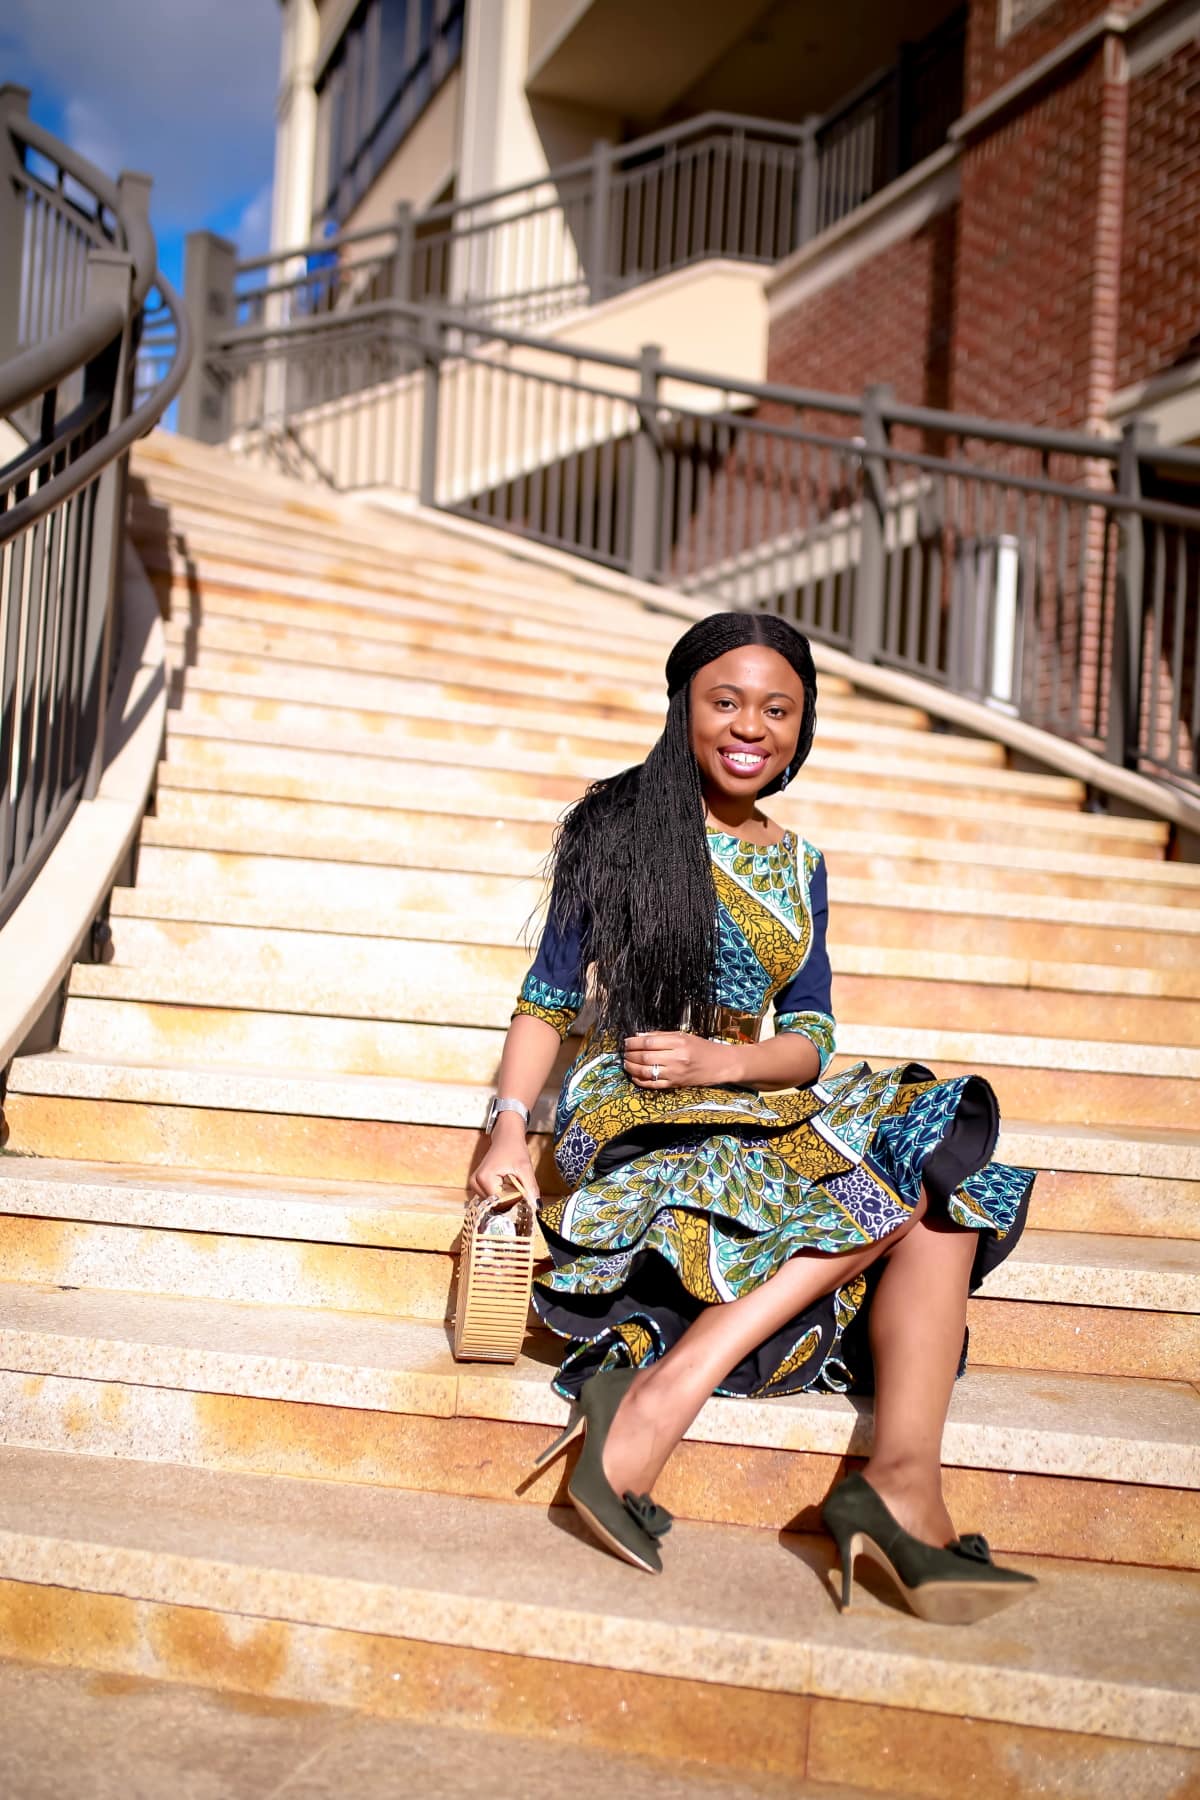 Looking for the perfect African print dress this summer? Ankara dress lover, Louisa, shares how she styles this lovely African attire, a three-tier ankara peplum dress in two ways. Plus details on where to buy the exact ankara midi dress she is wearing and how to make this African fashion dress for yourself. All about #africanfashionoutfits #africanprint #africanfashionstyles #nigerianfashion.